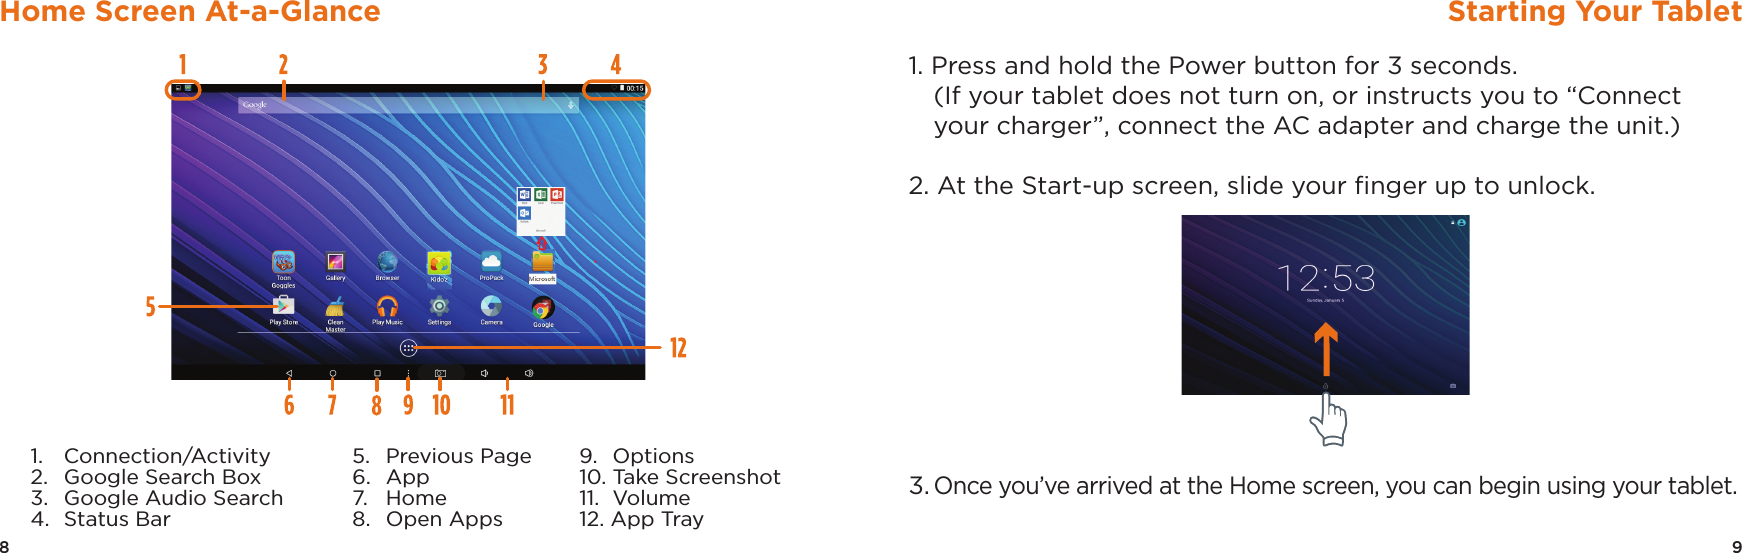 9Starting Your Tablet8Home Screen At-a-Glance1. Press and hold the Power button for 3 seconds.  (If your tablet does not turn on, or instructs you to “Connect your charger”, connect the AC adapter and charge the unit.)2. At the Start-up screen, slide your ﬁnger up to unlock.3. Once you’ve arrived at the Home screen, you can begin using your tablet.1.   Connection/Activity2.   Google Search Box3.   Google Audio Search4.  Status Bar5.   Previous Page6.  App7.  Home8.  Open Apps9.  Options10. Take Screenshot 11.  Volume12. App Tray